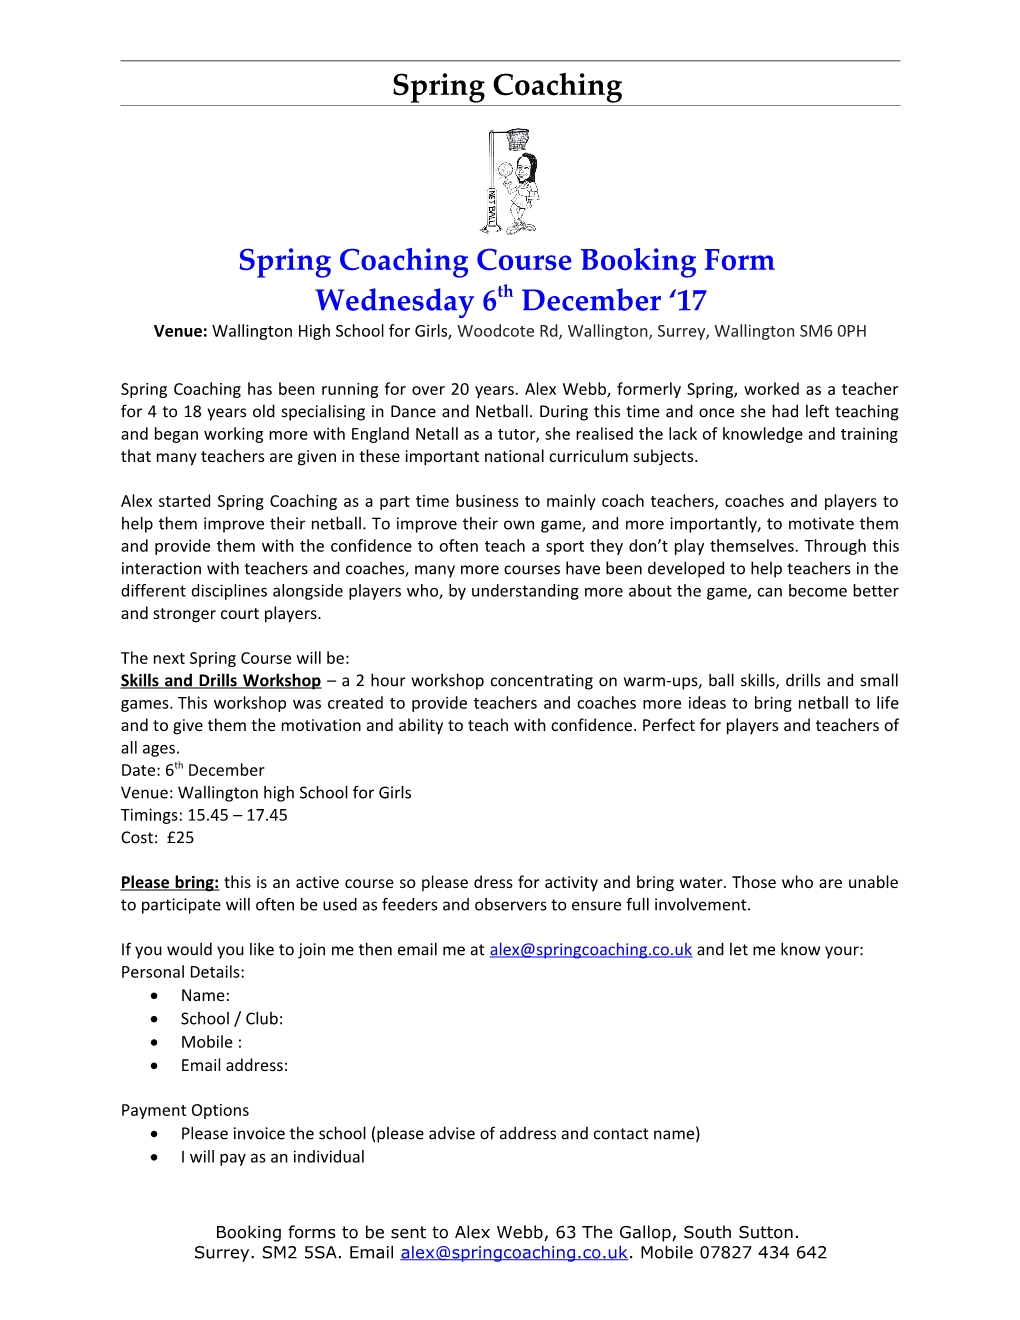 Spring Coaching Course Booking Form